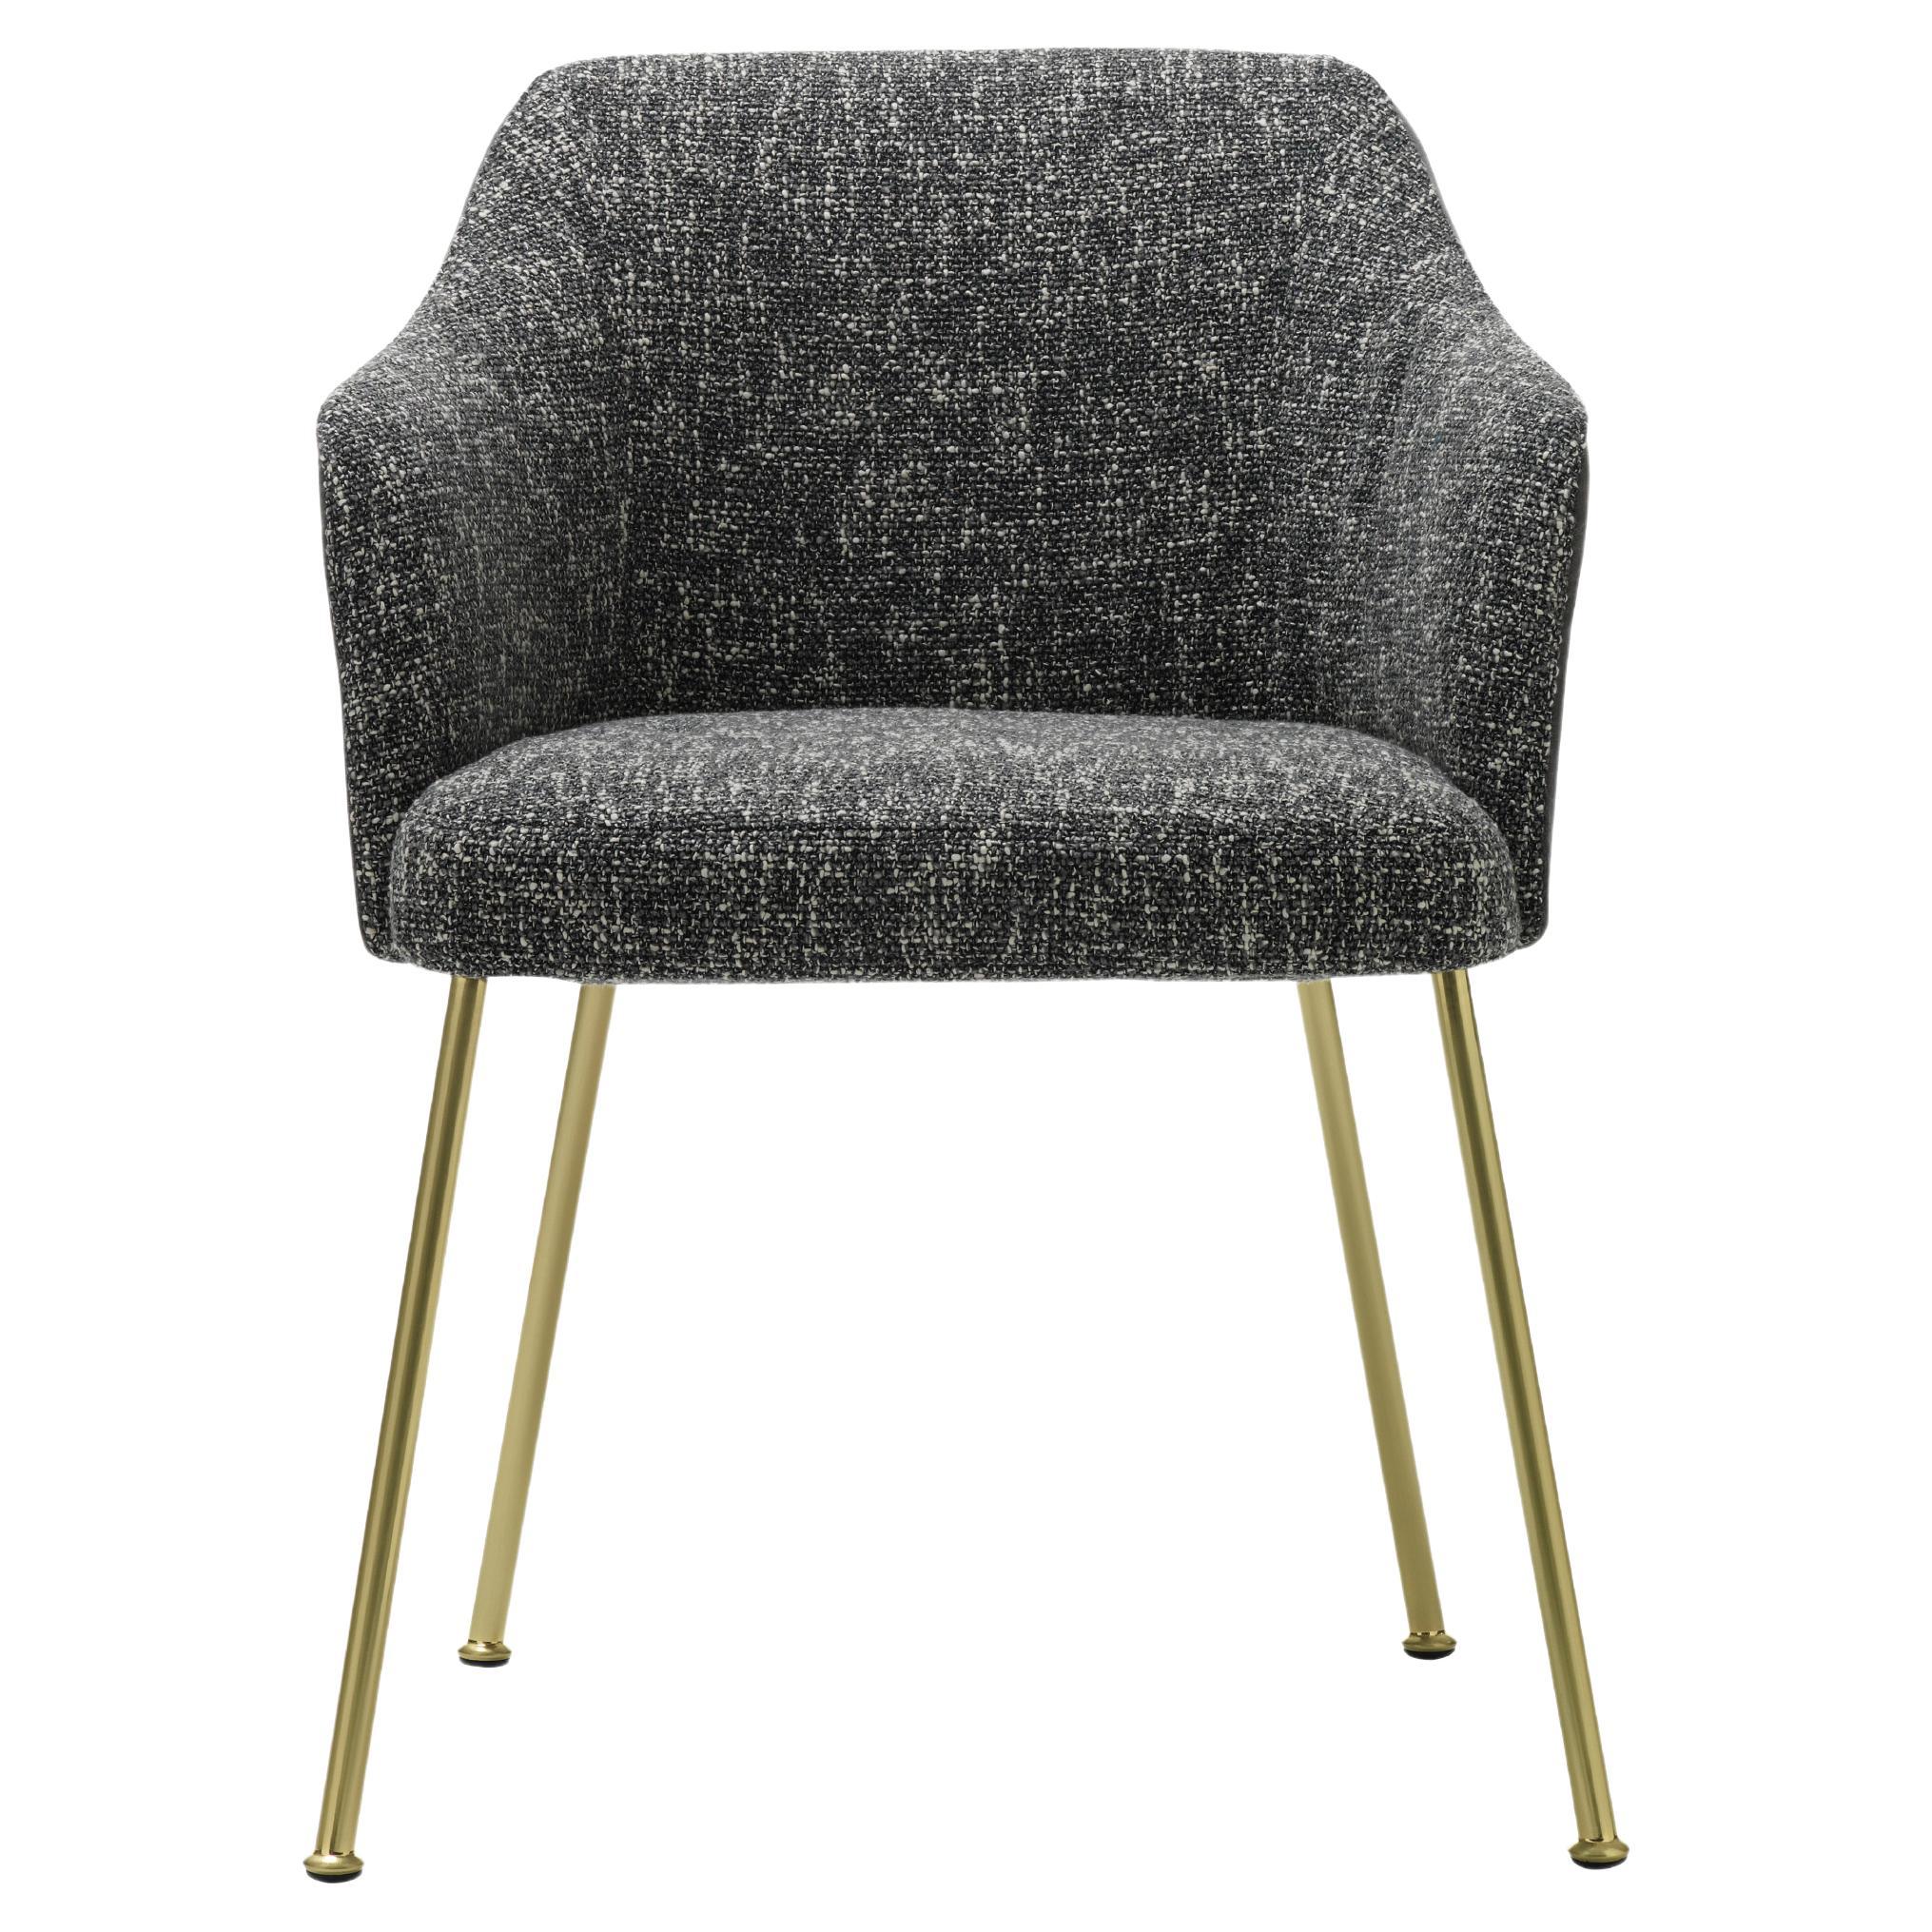 Isabelle Chair in Seventy Grey Upholstery with Satin Brass Legs by Saba For Sale